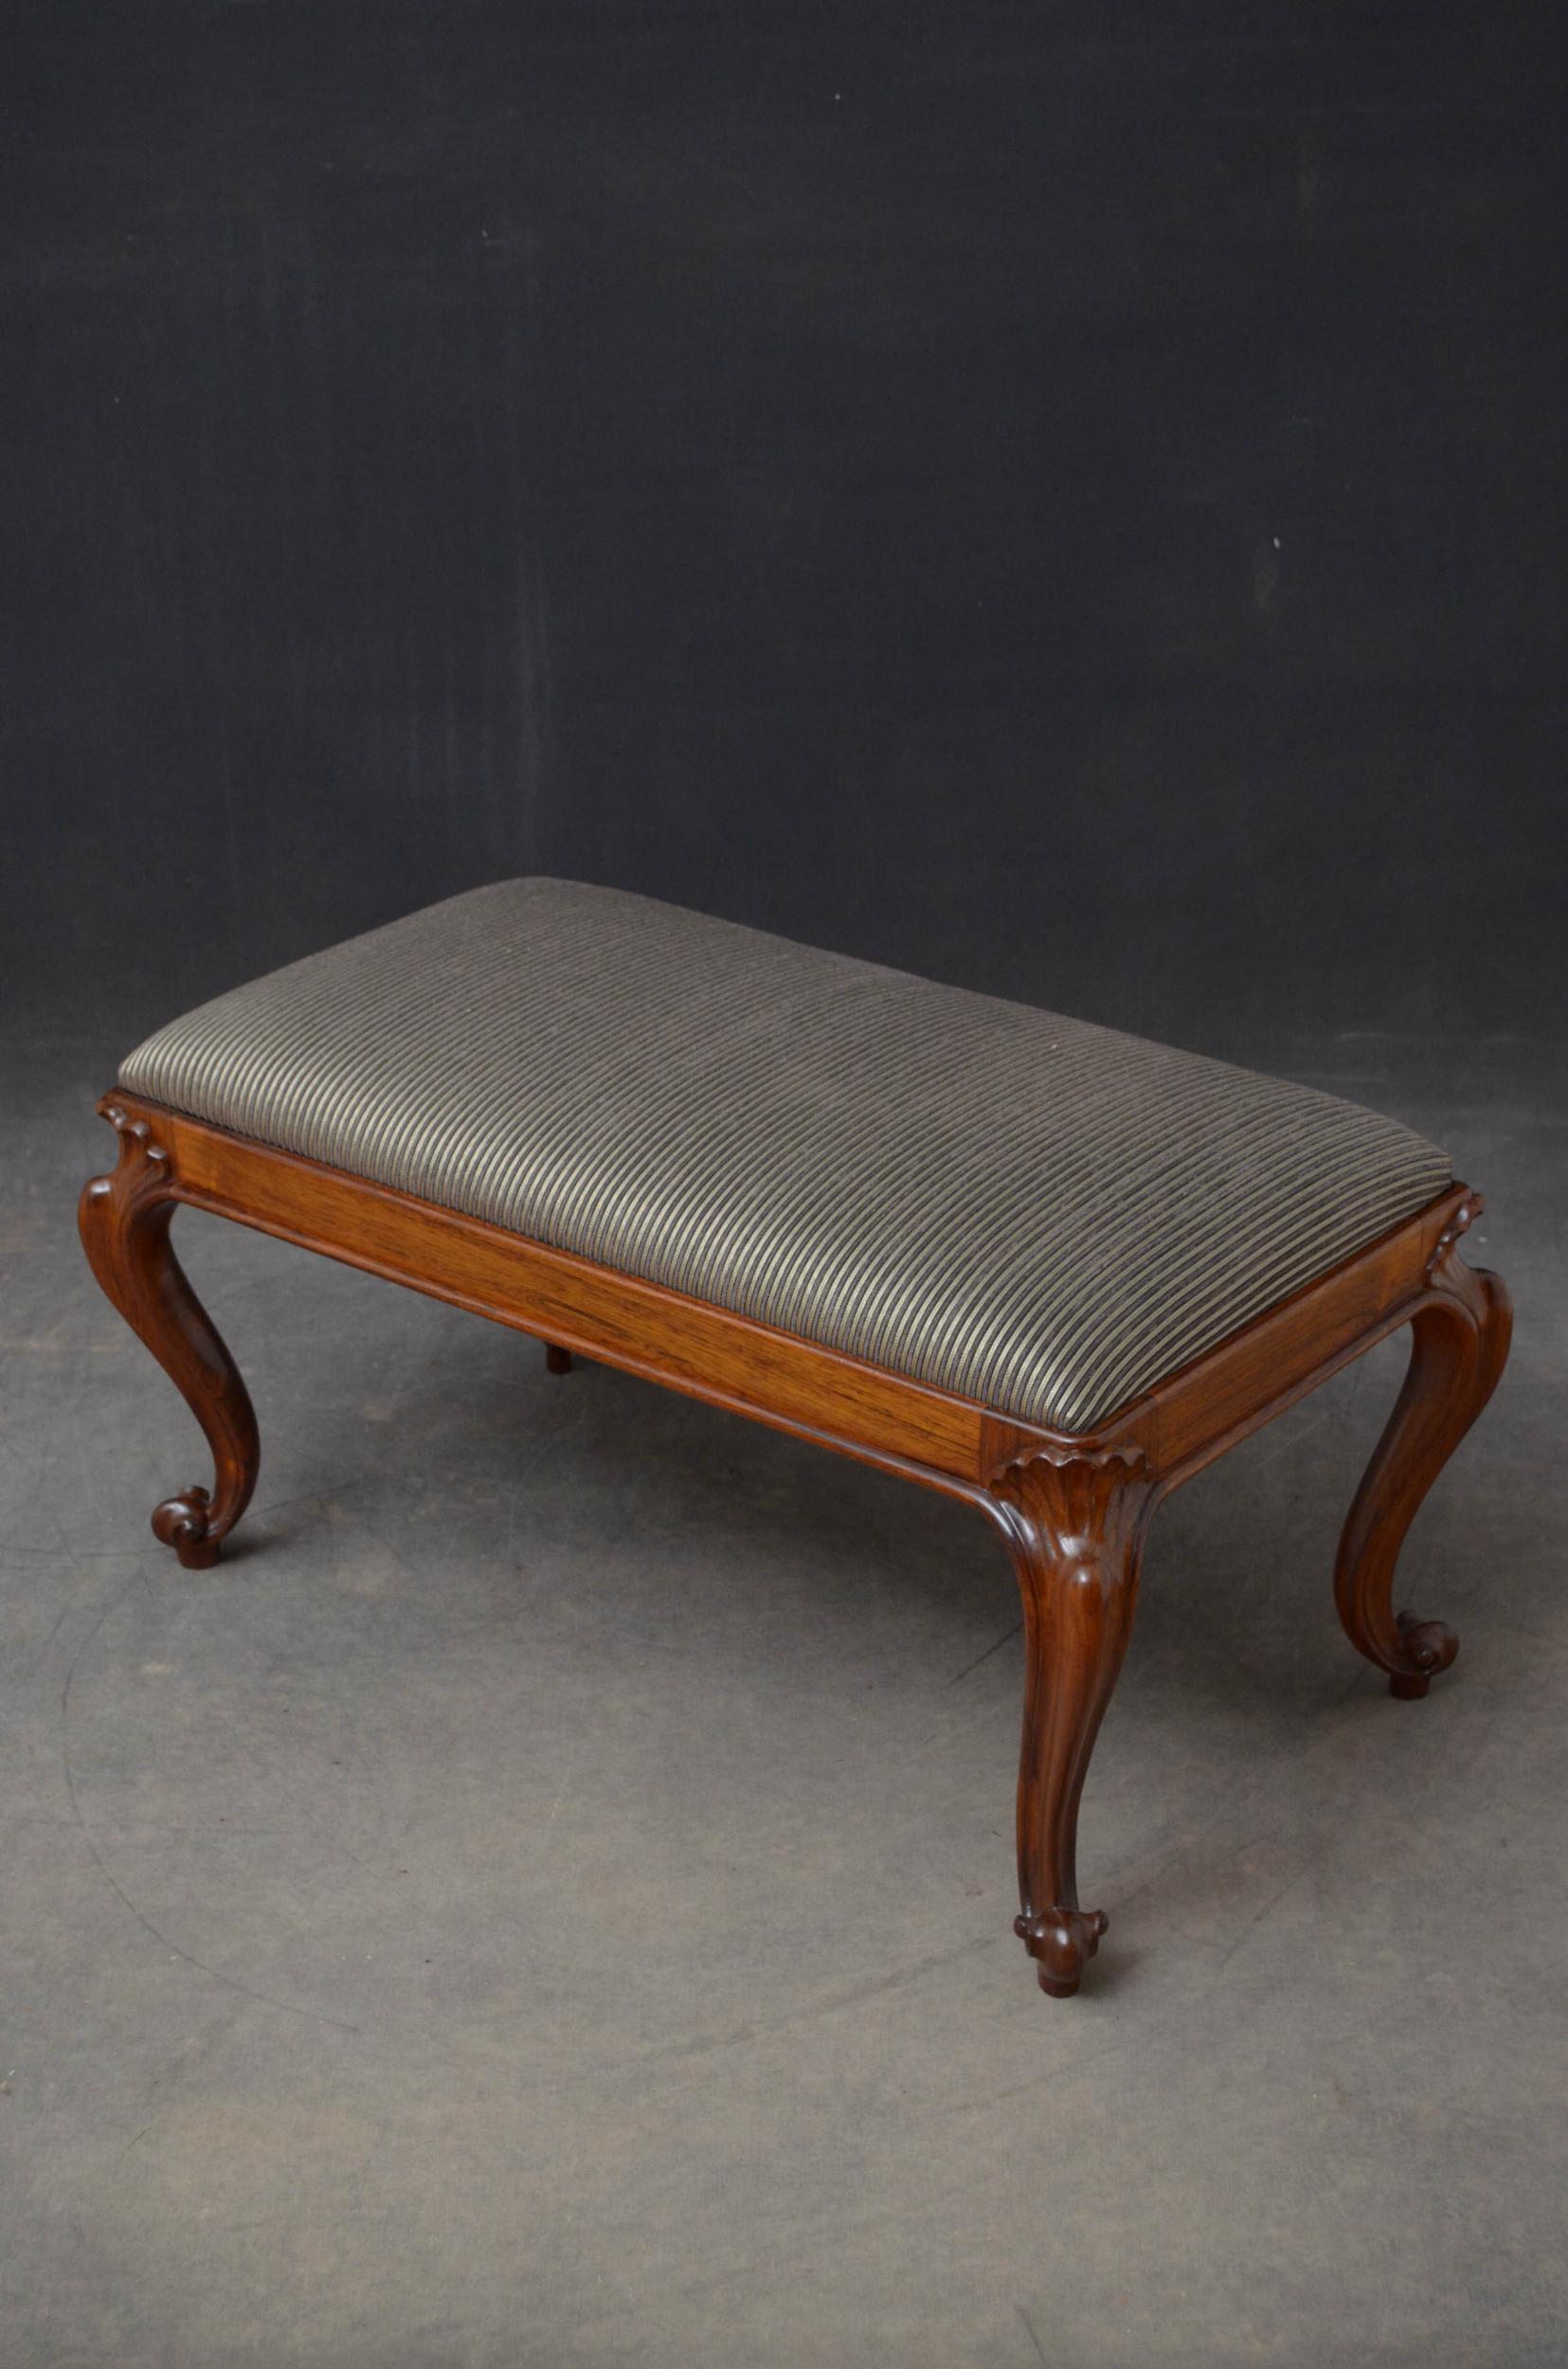 Sn4905, superb quality rosewood stool, having a drop in seat recovered in a contemporary fabric and moulded frieze, standing on finely carved cabriole legs with knurled feet. This antique stool has been sympathetically restored and is ready to place